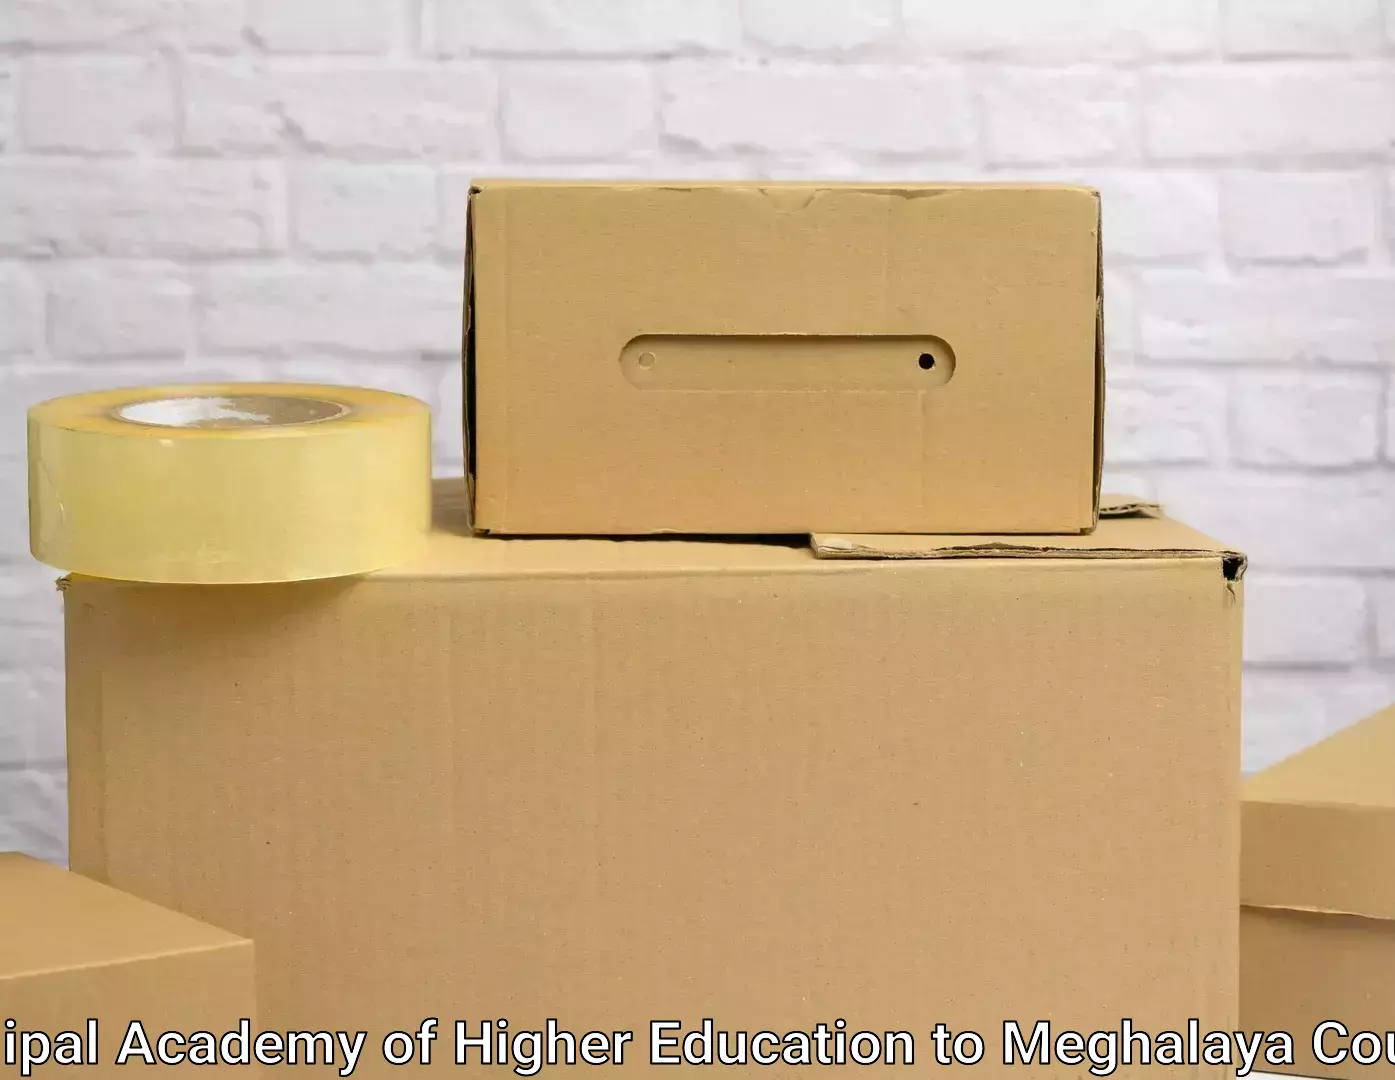 Door-to-door relocation services Manipal Academy of Higher Education to Meghalaya